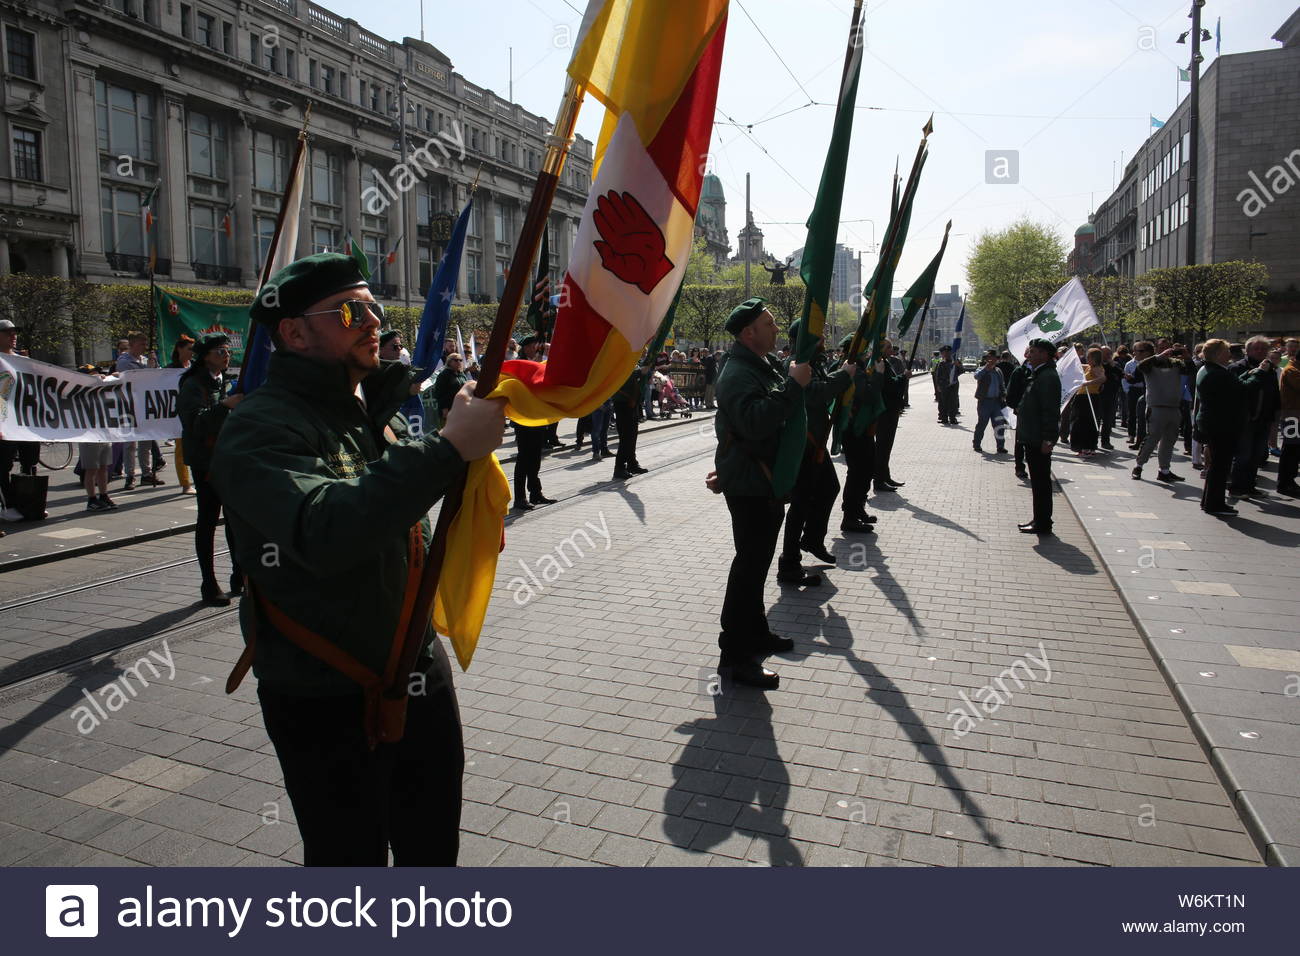 A military parade has taken place in Dublin to commemorate the 1916 Rising. Activists in military style uniform marched through Dublin followed by a s Stock Photo